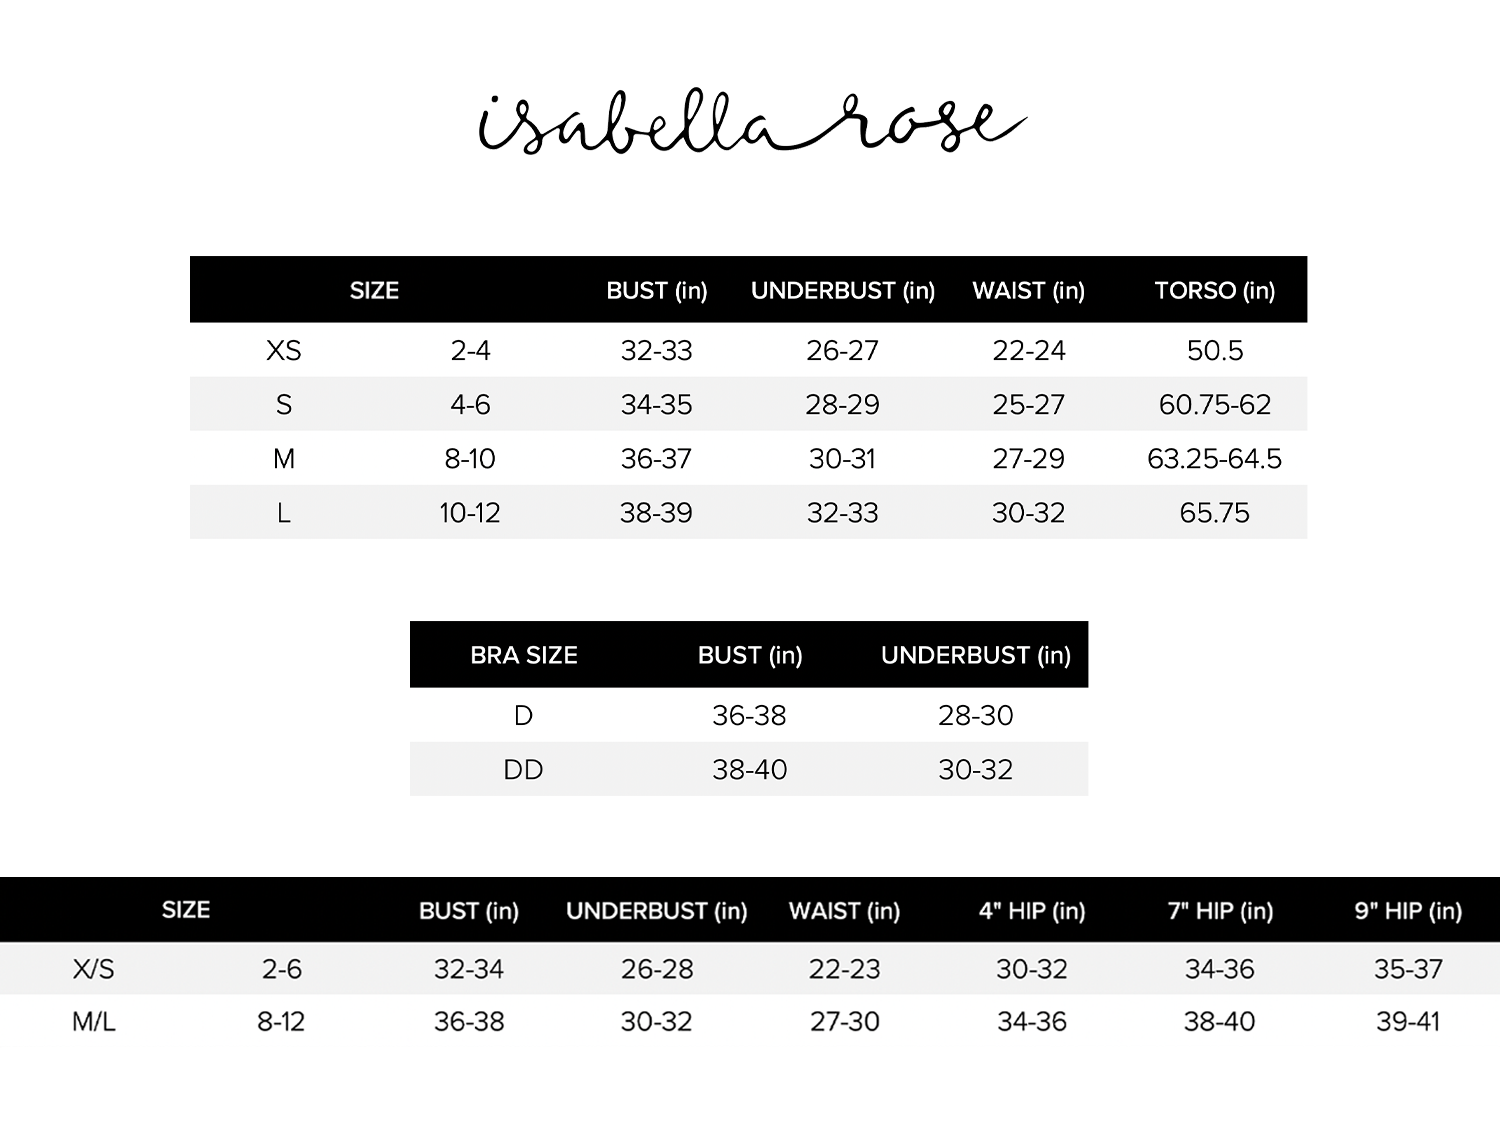 ISABELLA ROSE SIZE CHART – DTC Outlet